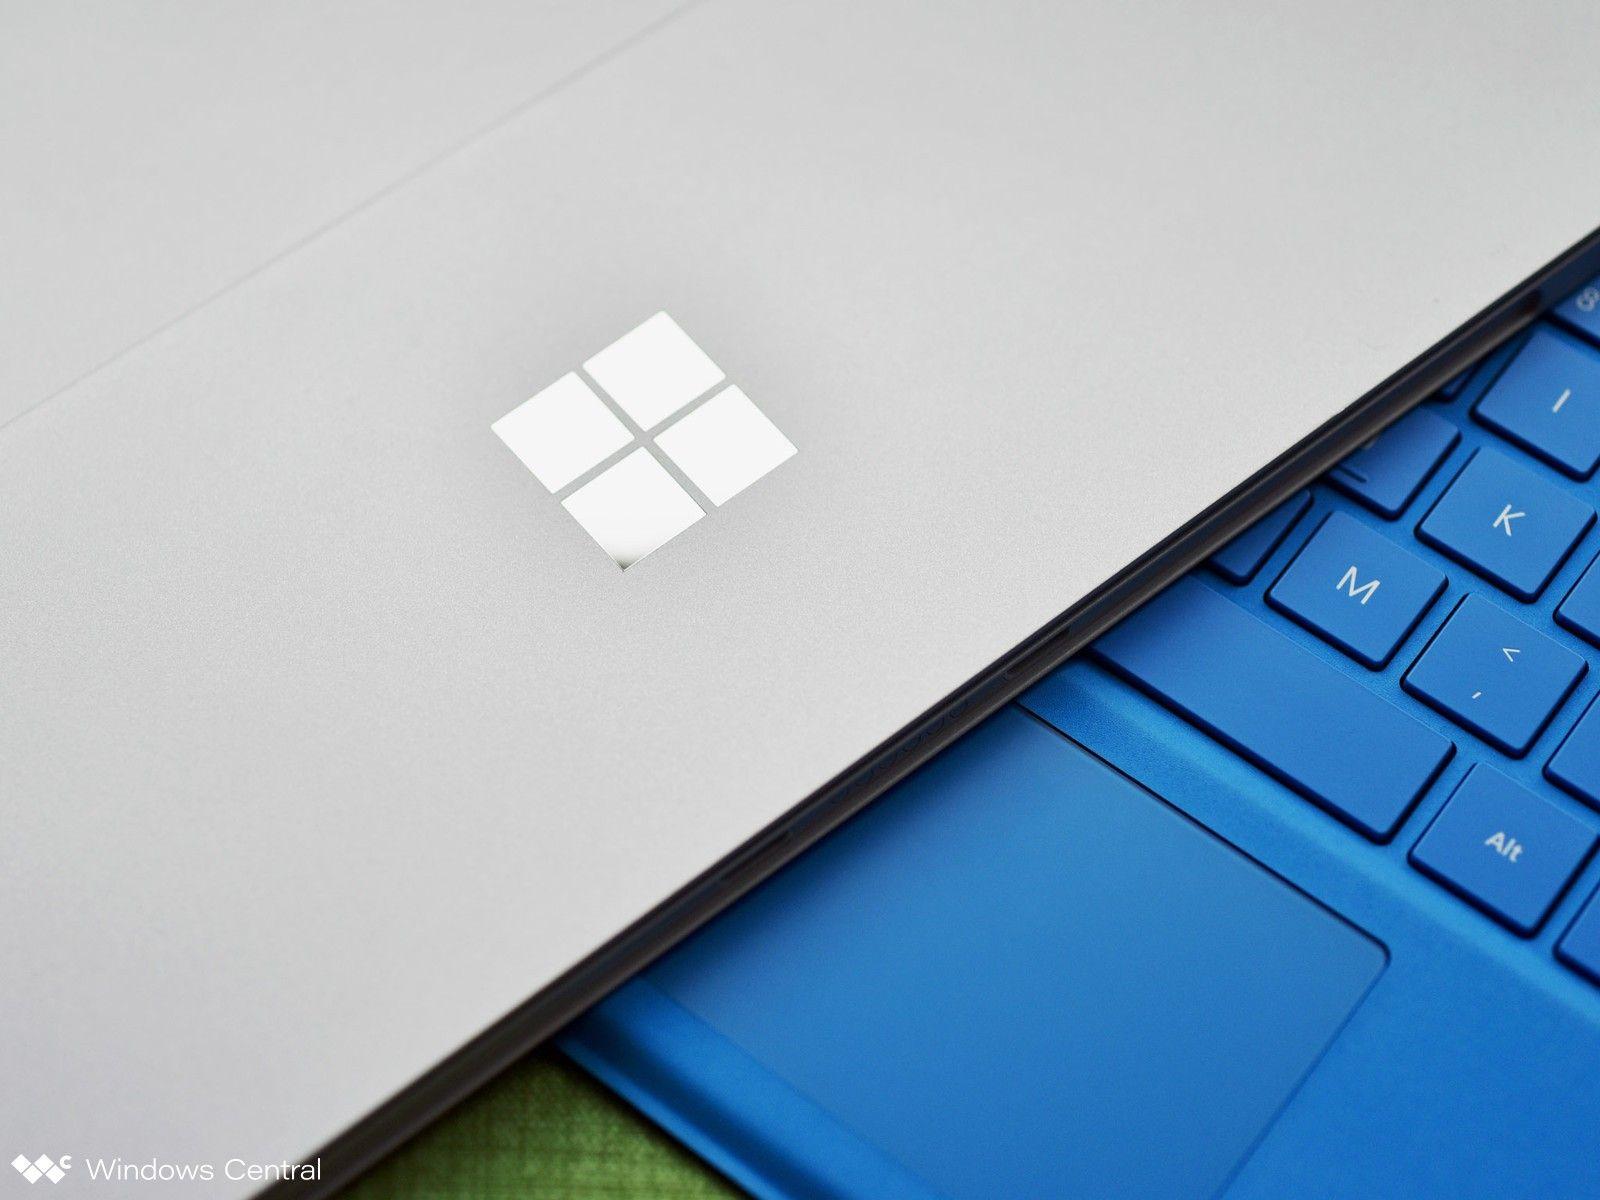 Windows Surface Logo - What We Hope To See In A New 10 Inch Surface From Microsoft